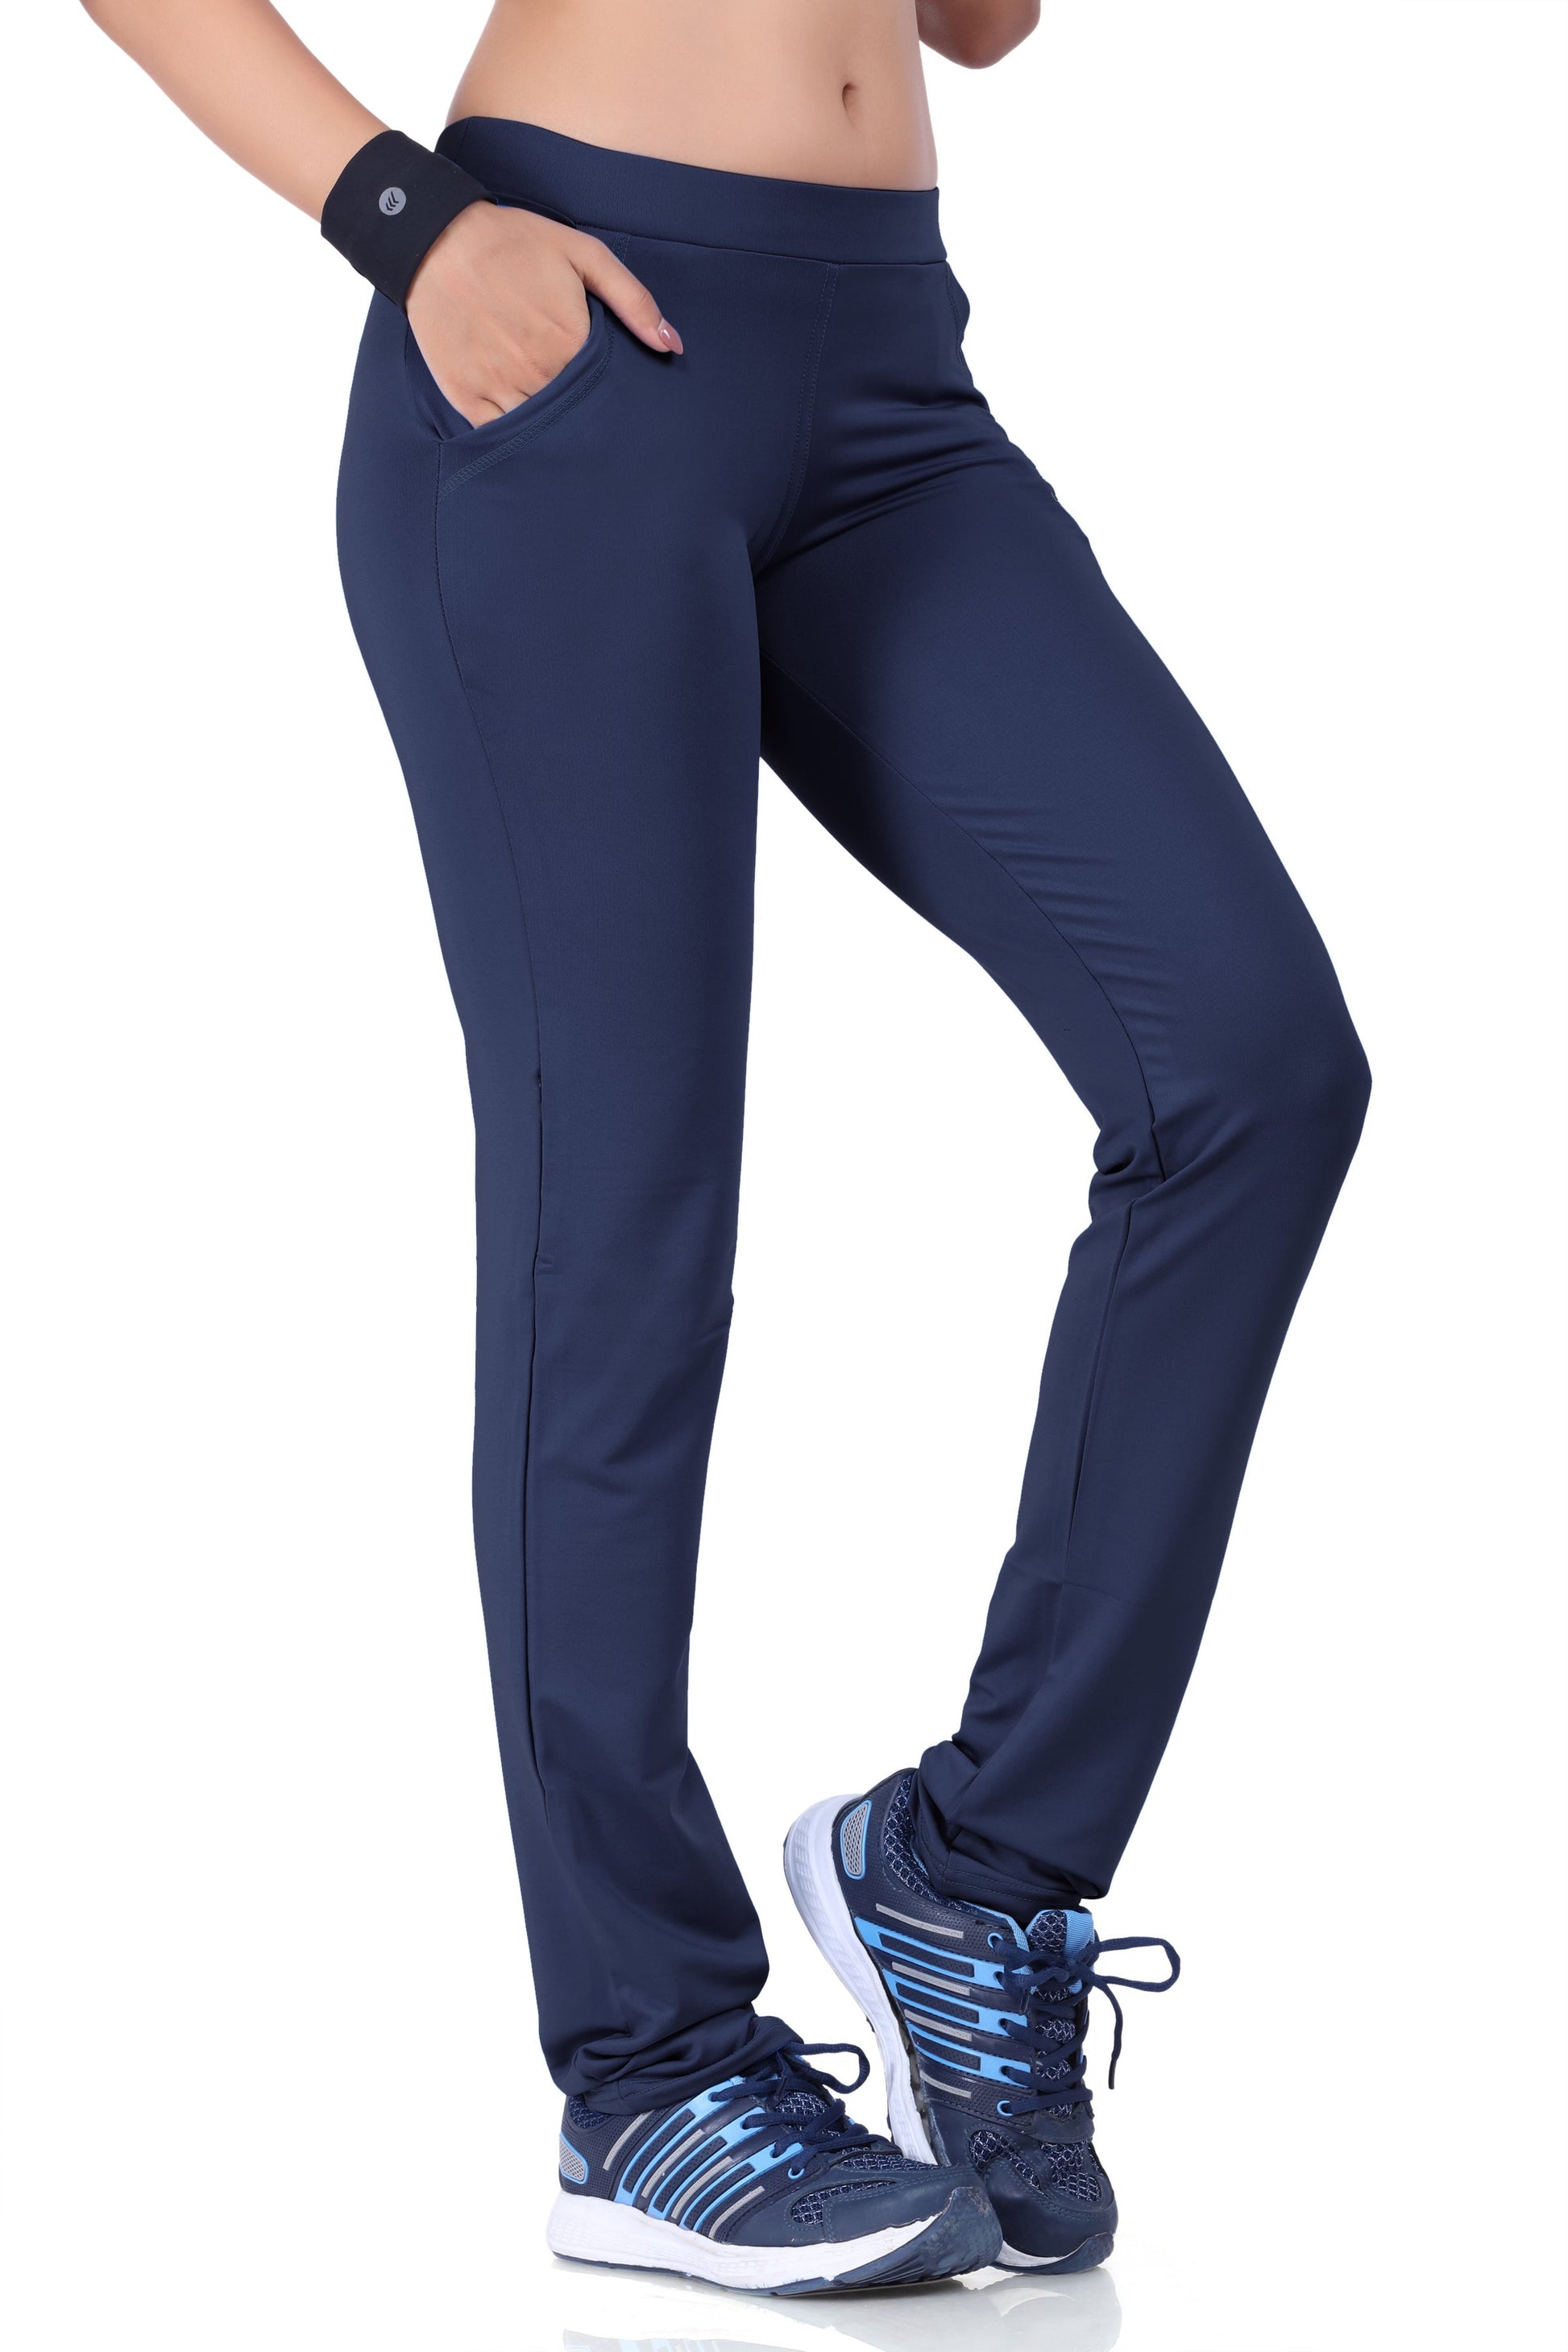 Laasa Sports - WOMEN'S ESSENTIAL WALKING TRACK PANTS The Essentials Running  Track pant from Laasa bring comfort and an easy feel to your everyday  ensemble. #LAASA #active #oufitstyle #sportyoutfit #sportylook #sportygirl  #sporty #